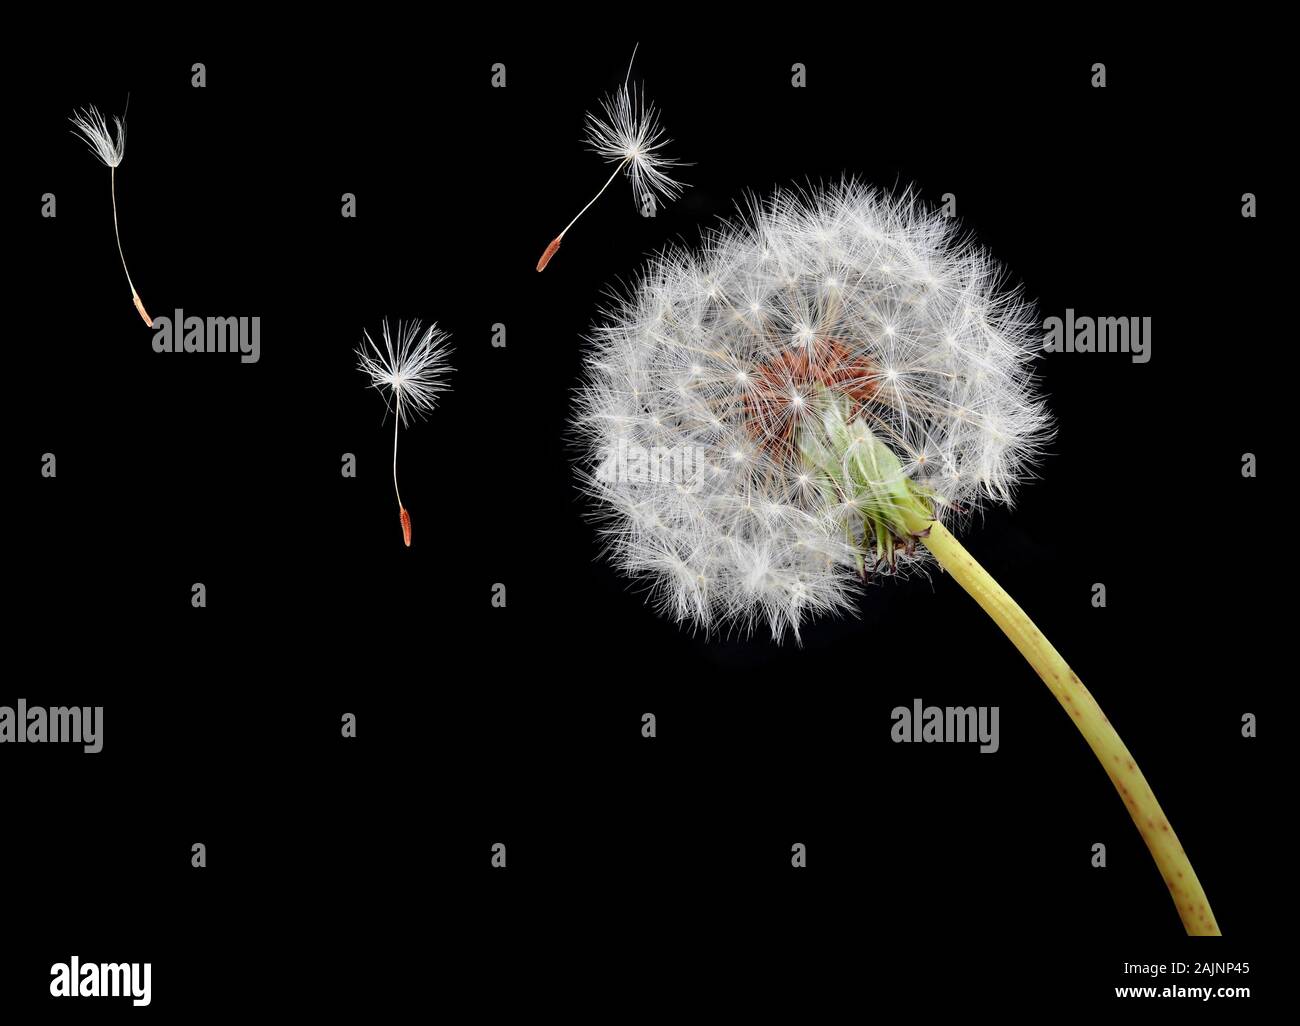 Dandelion seeds floating on the wind, isolated on a black background Stock Photo